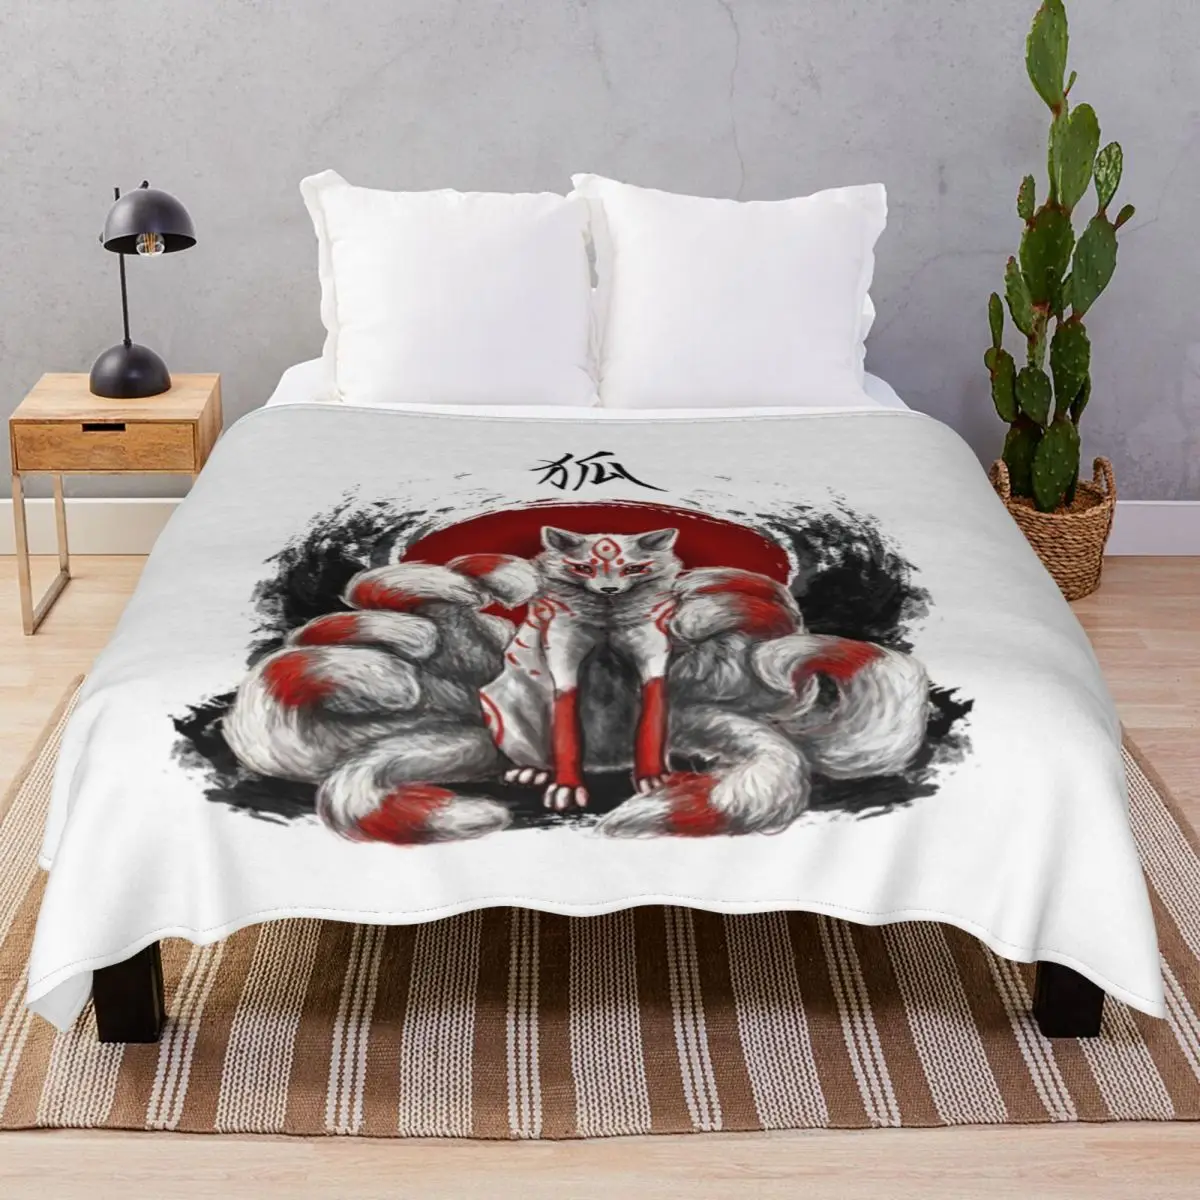 Japanese Nine Tailed Fox Kitsune Blankets Coral Fleece All Season Super Warm Throw Blanket for Bedding Home Couch Camp Office